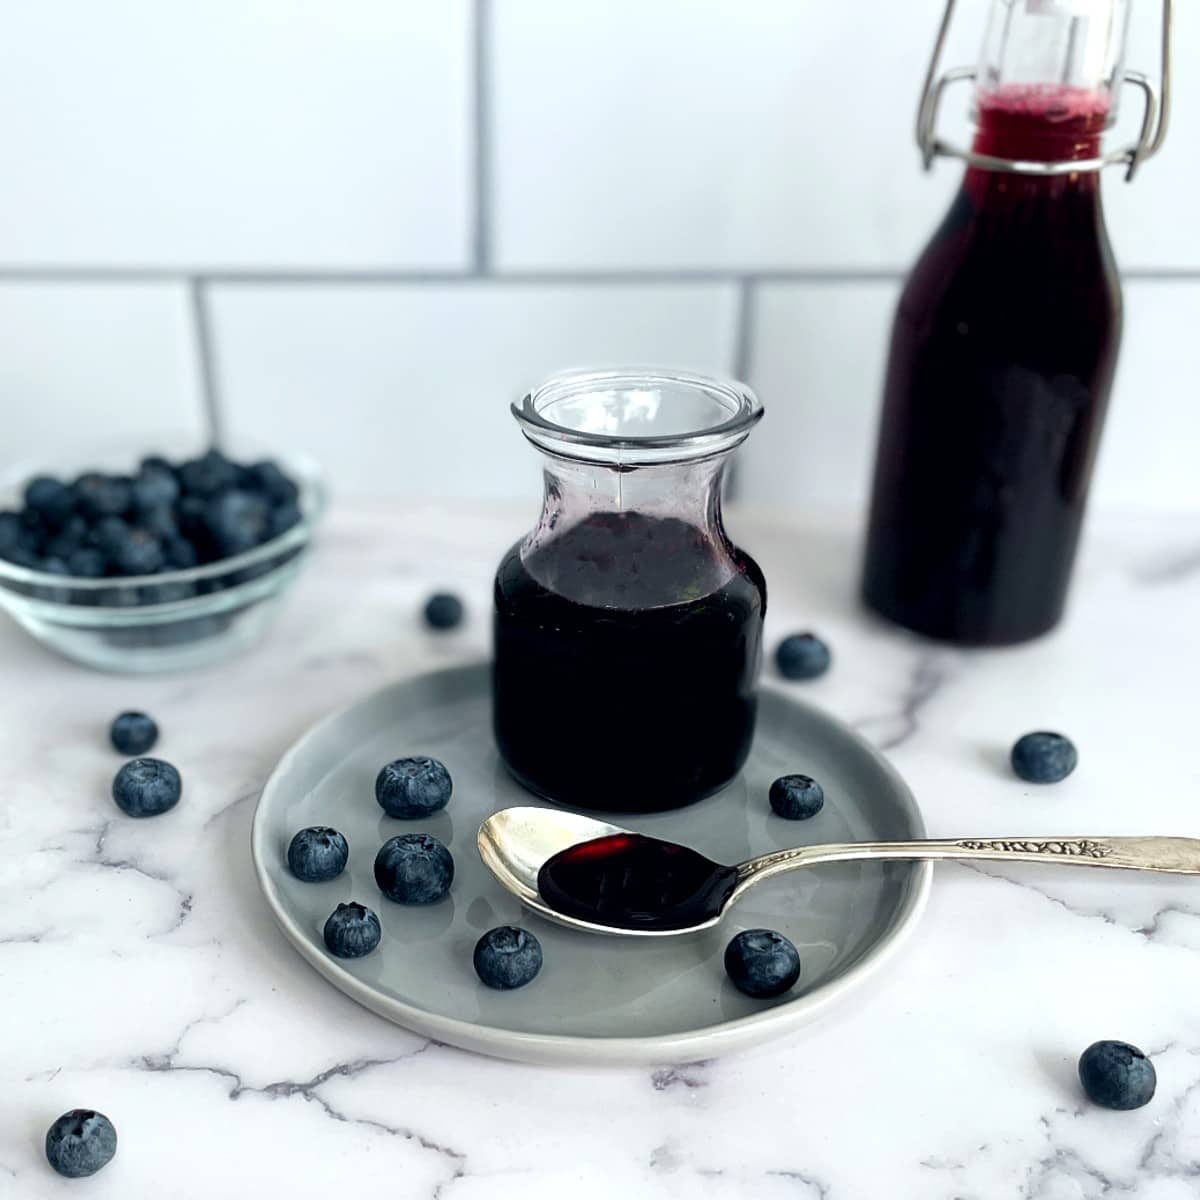 blueberry syrup in a jar and a bottle